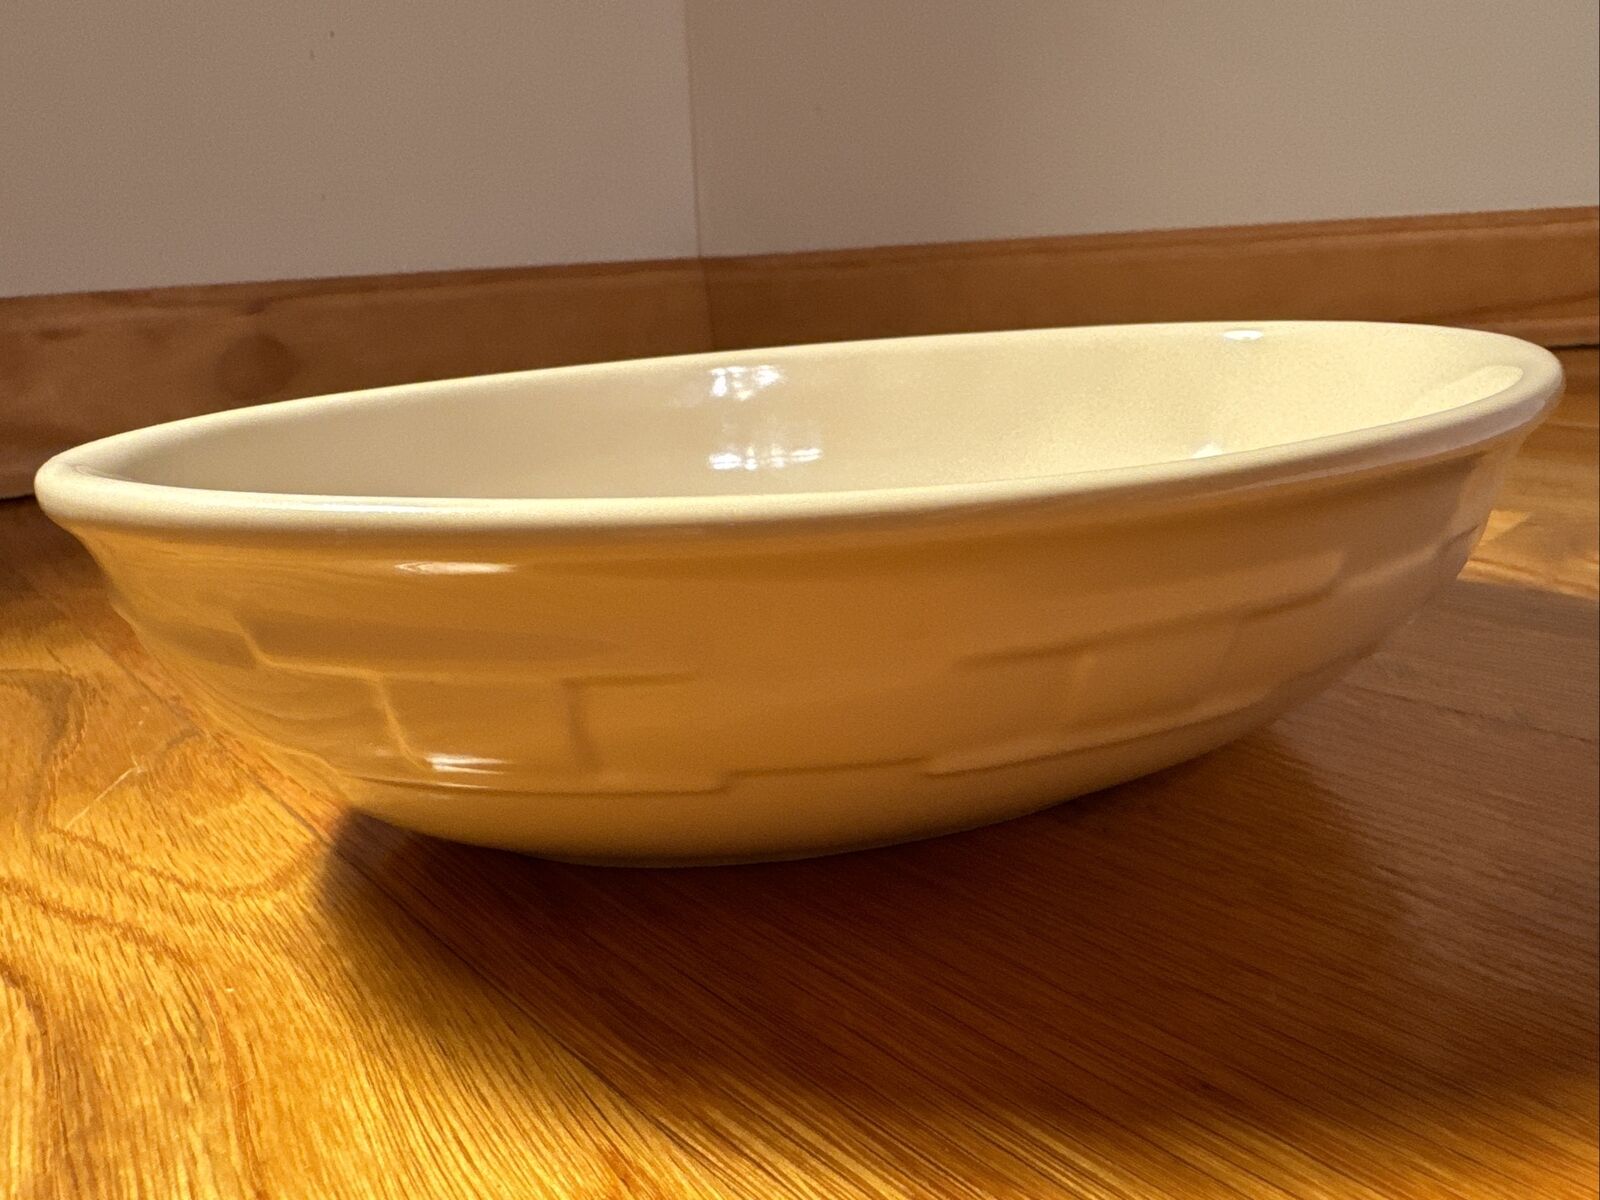 LONGABERGER WOVEN TRADITIONS IVORY POTTERY Oval Vegetable Serving Bowl 9 3/8”EUC